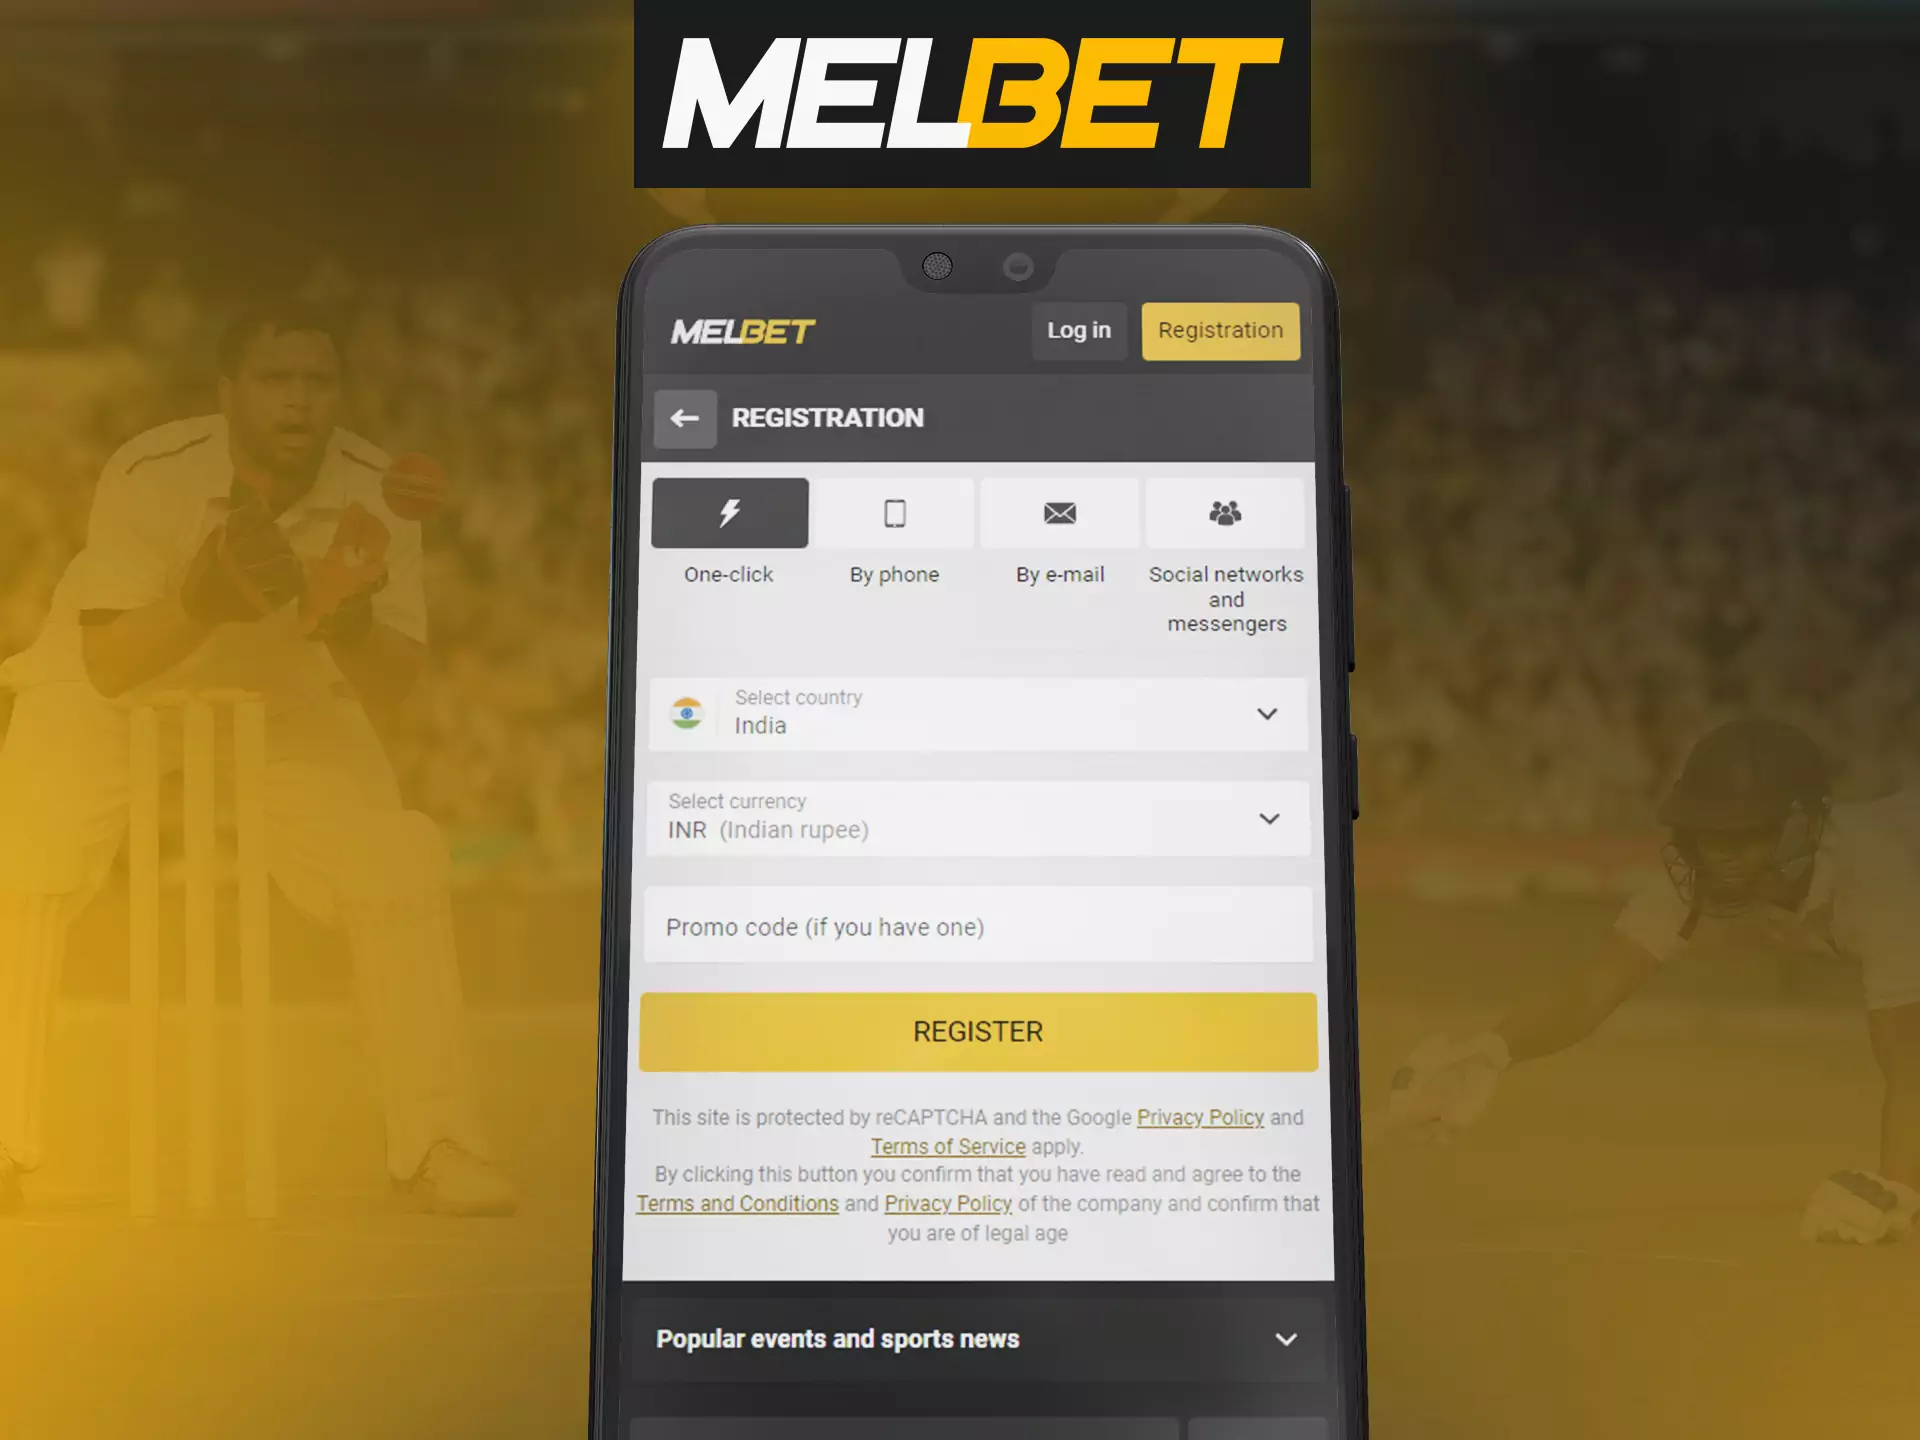 Complete a simple registration in the Melbet app.